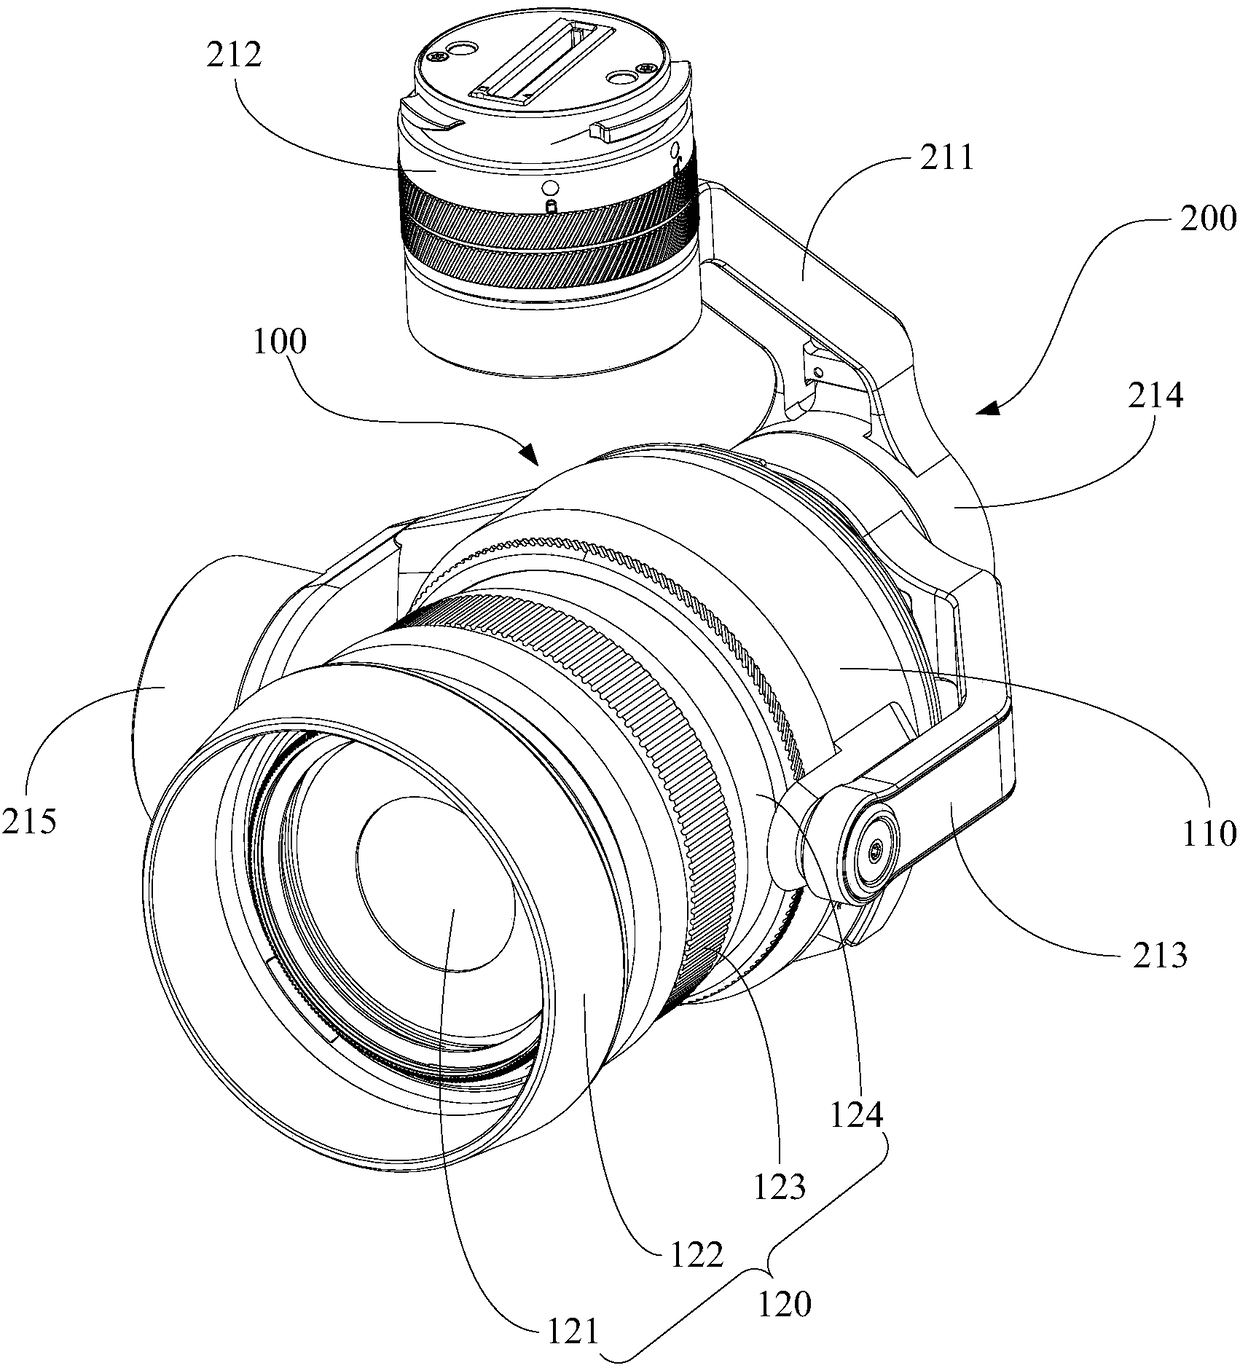 Imaging device, cradle head and camera body